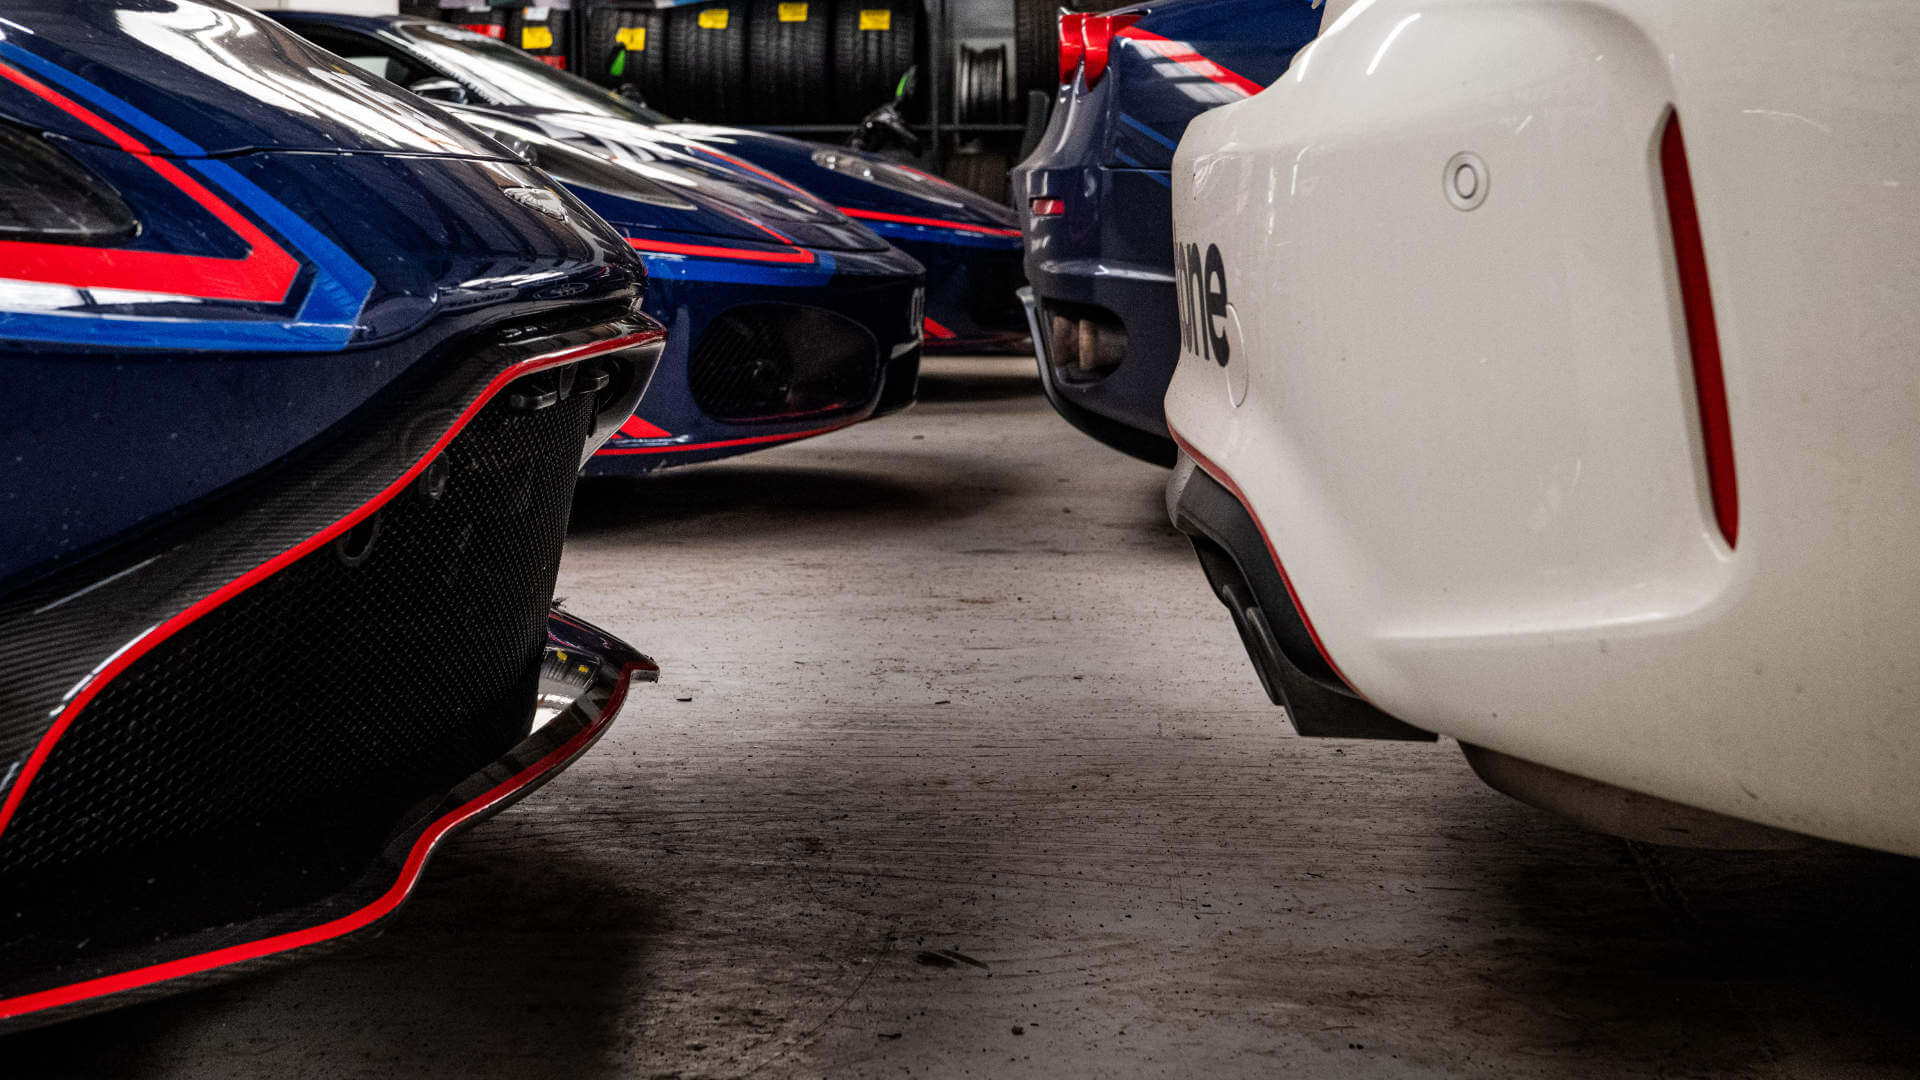 Supercars sit bumper to bumper inside the workshop, showing how many cars can fit inside